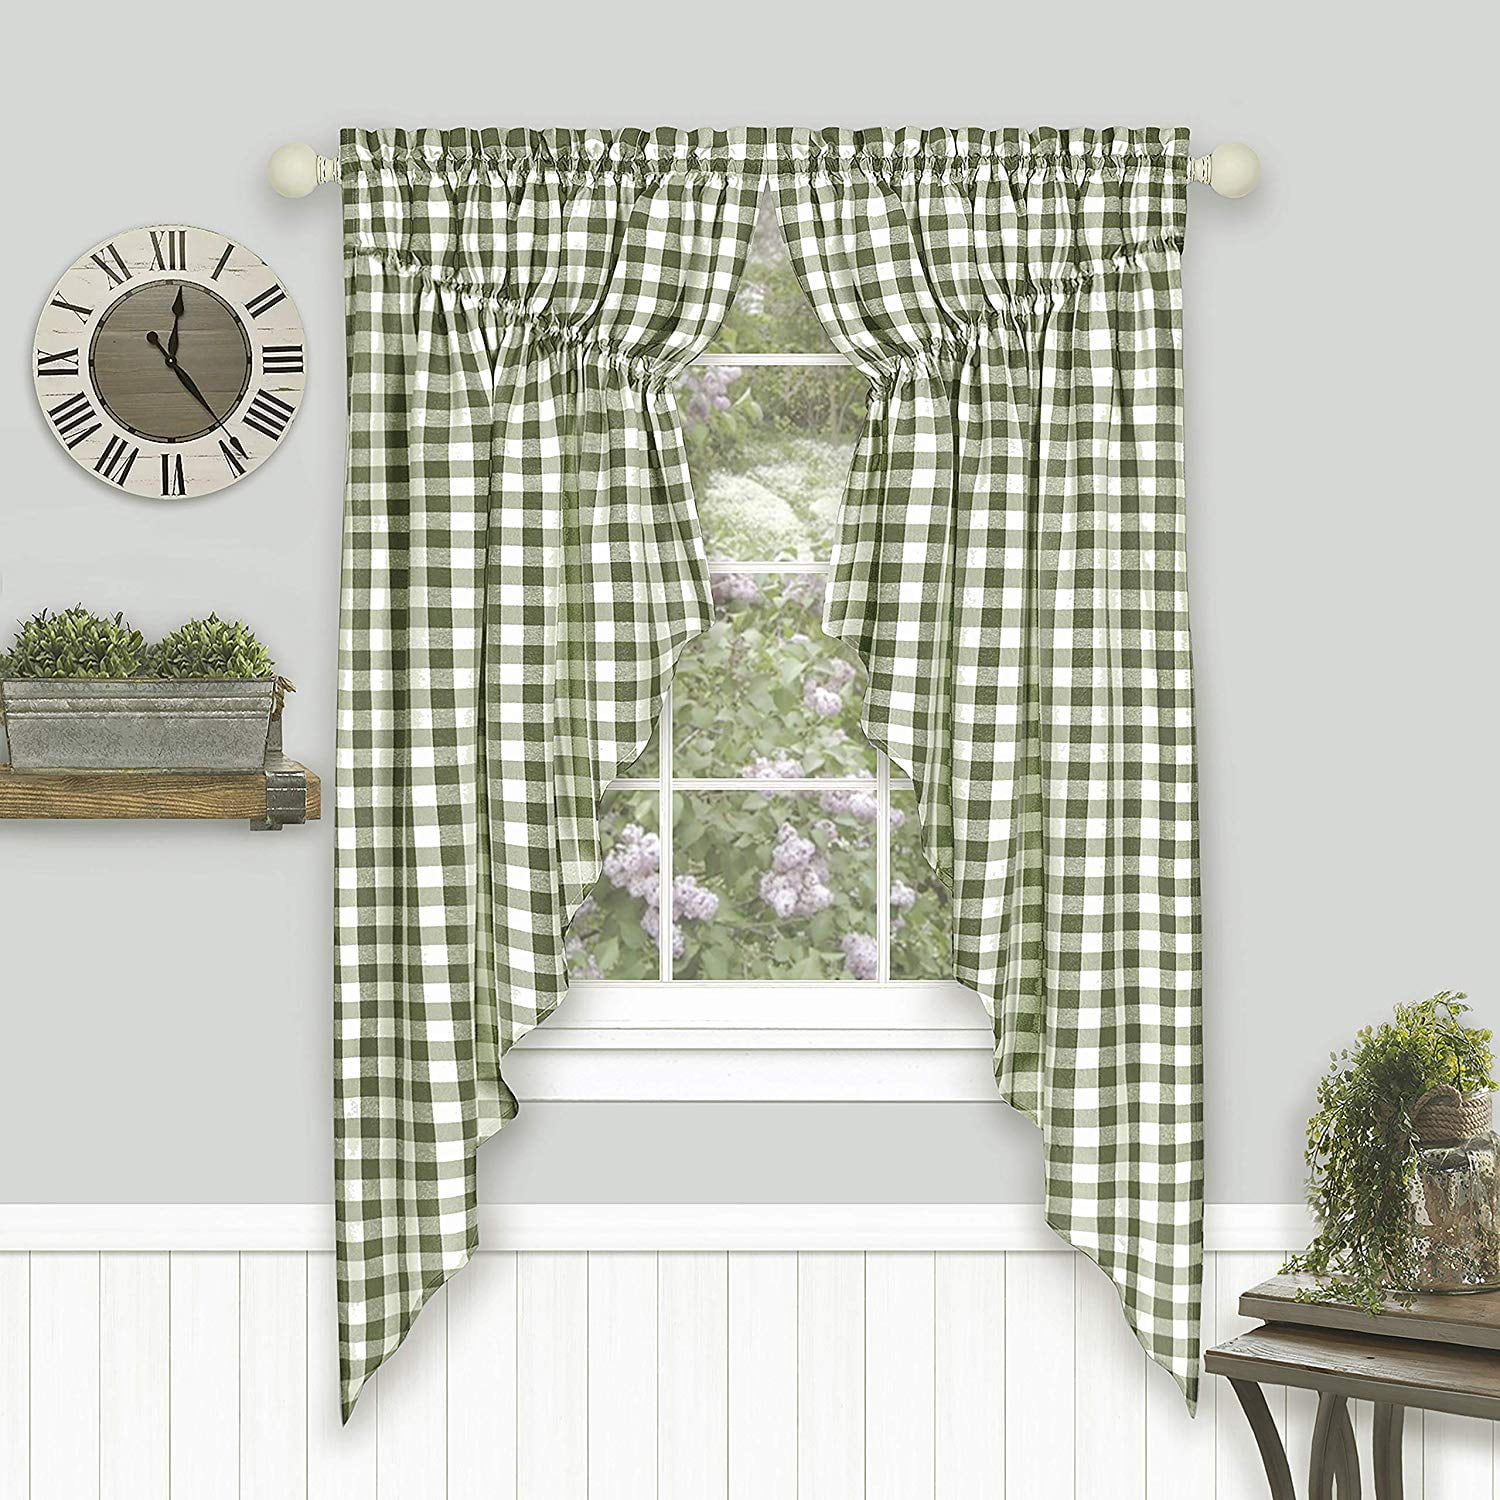 GIRLS PLAYHOUSE CURTAINS ~ SAGE ROSE ~ INCLUDES FITTINGS 